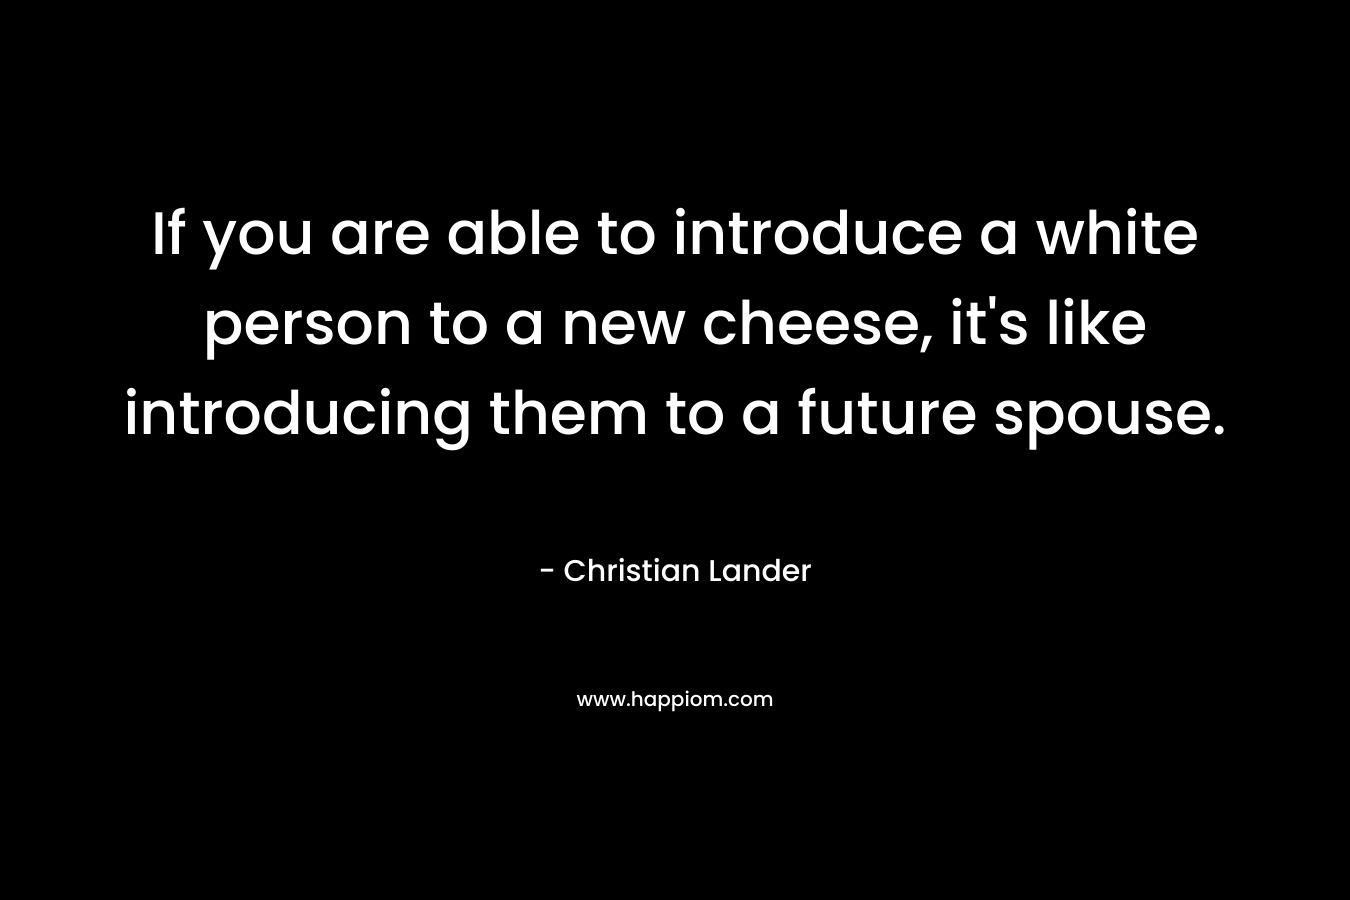 If you are able to introduce a white person to a new cheese, it’s like introducing them to a future spouse. – Christian Lander